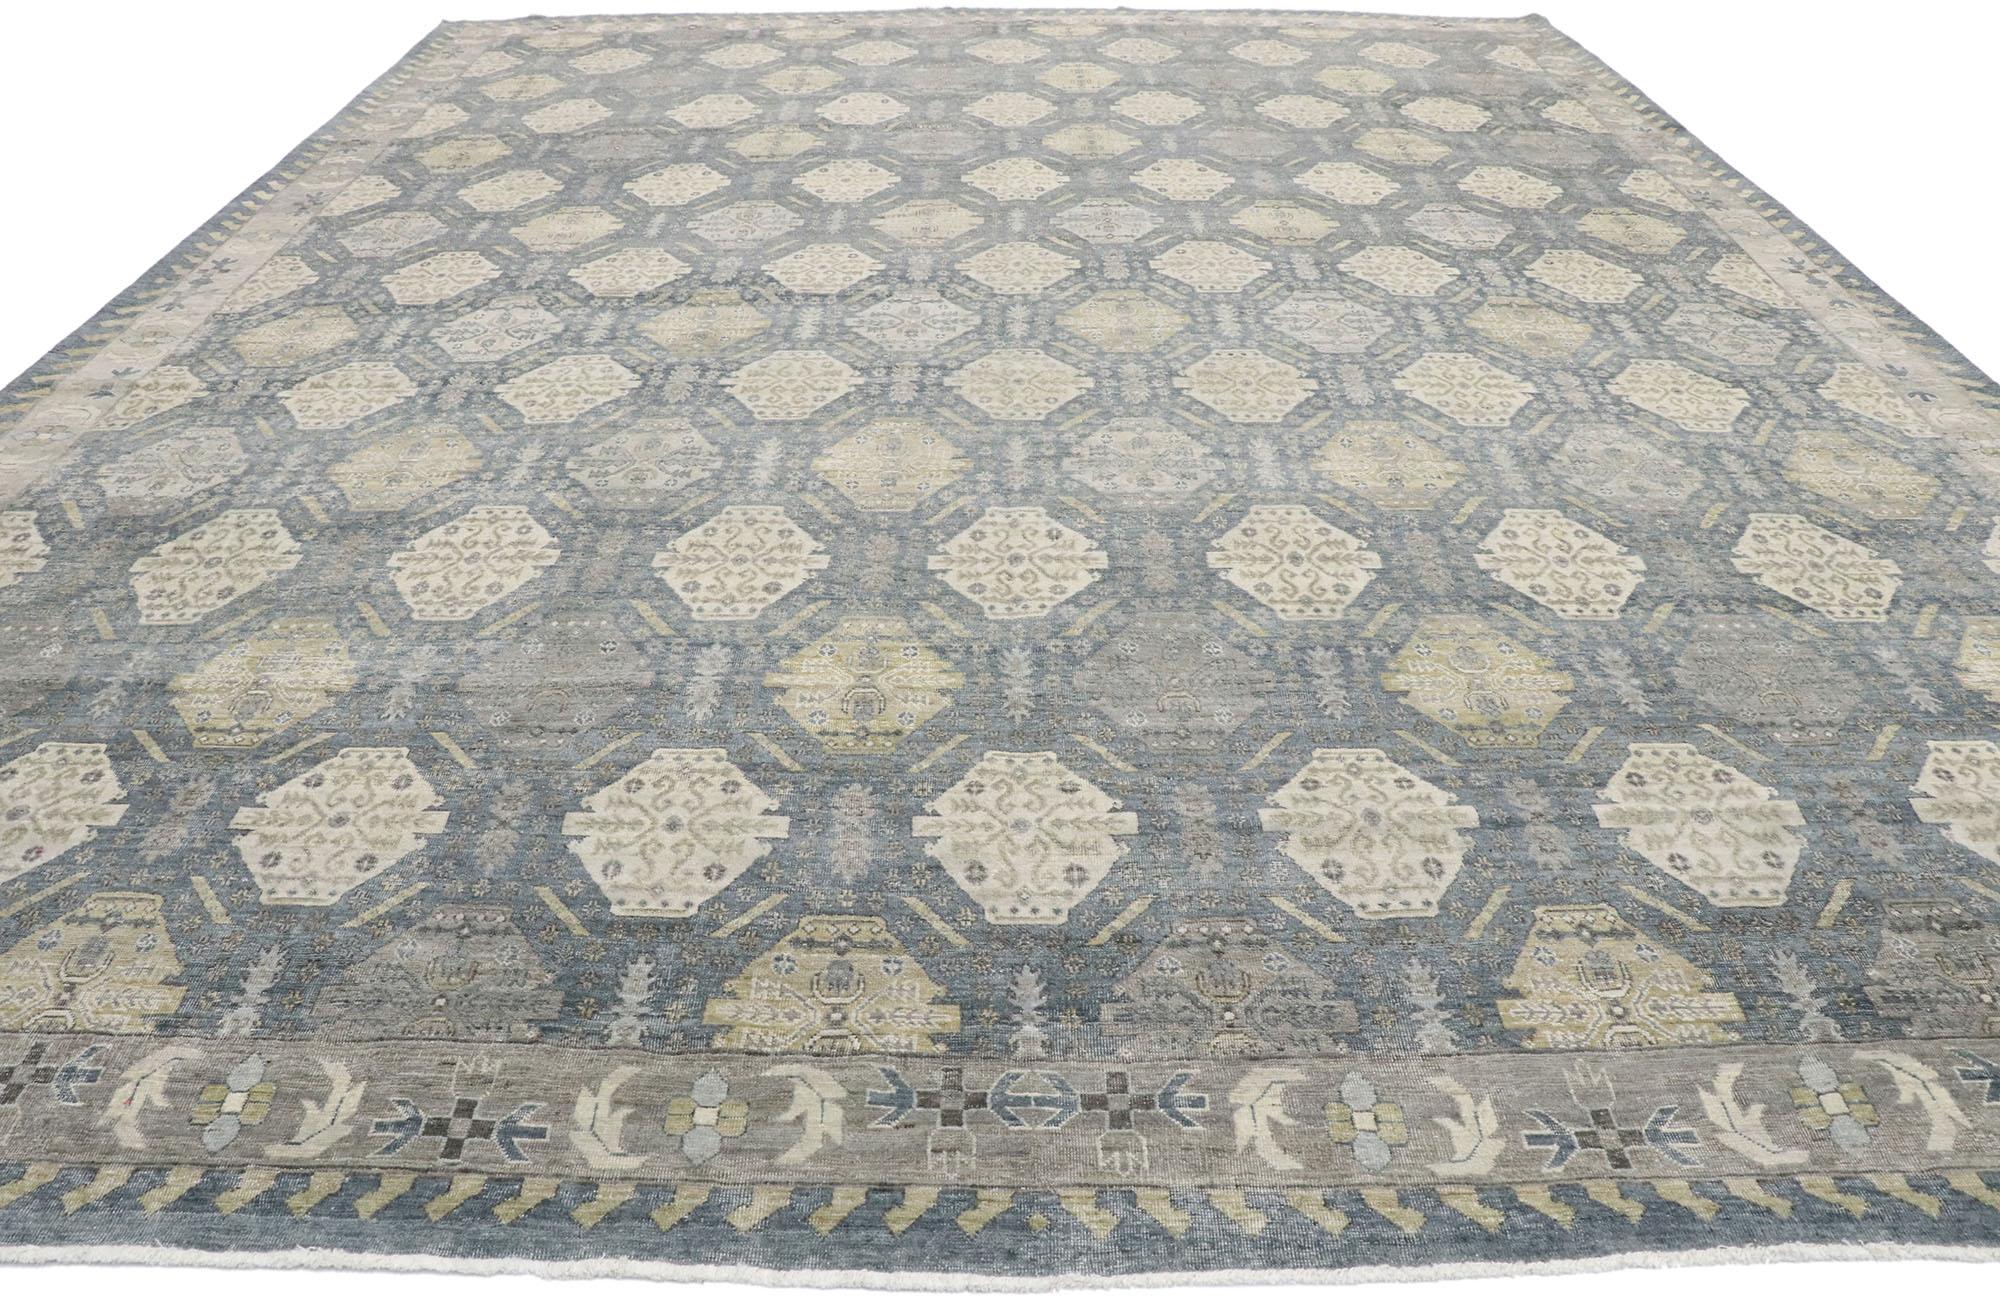 Indian Vintage-Inspired Muted Oushak Rug, Modern Style Meets Rustic Sensibility For Sale